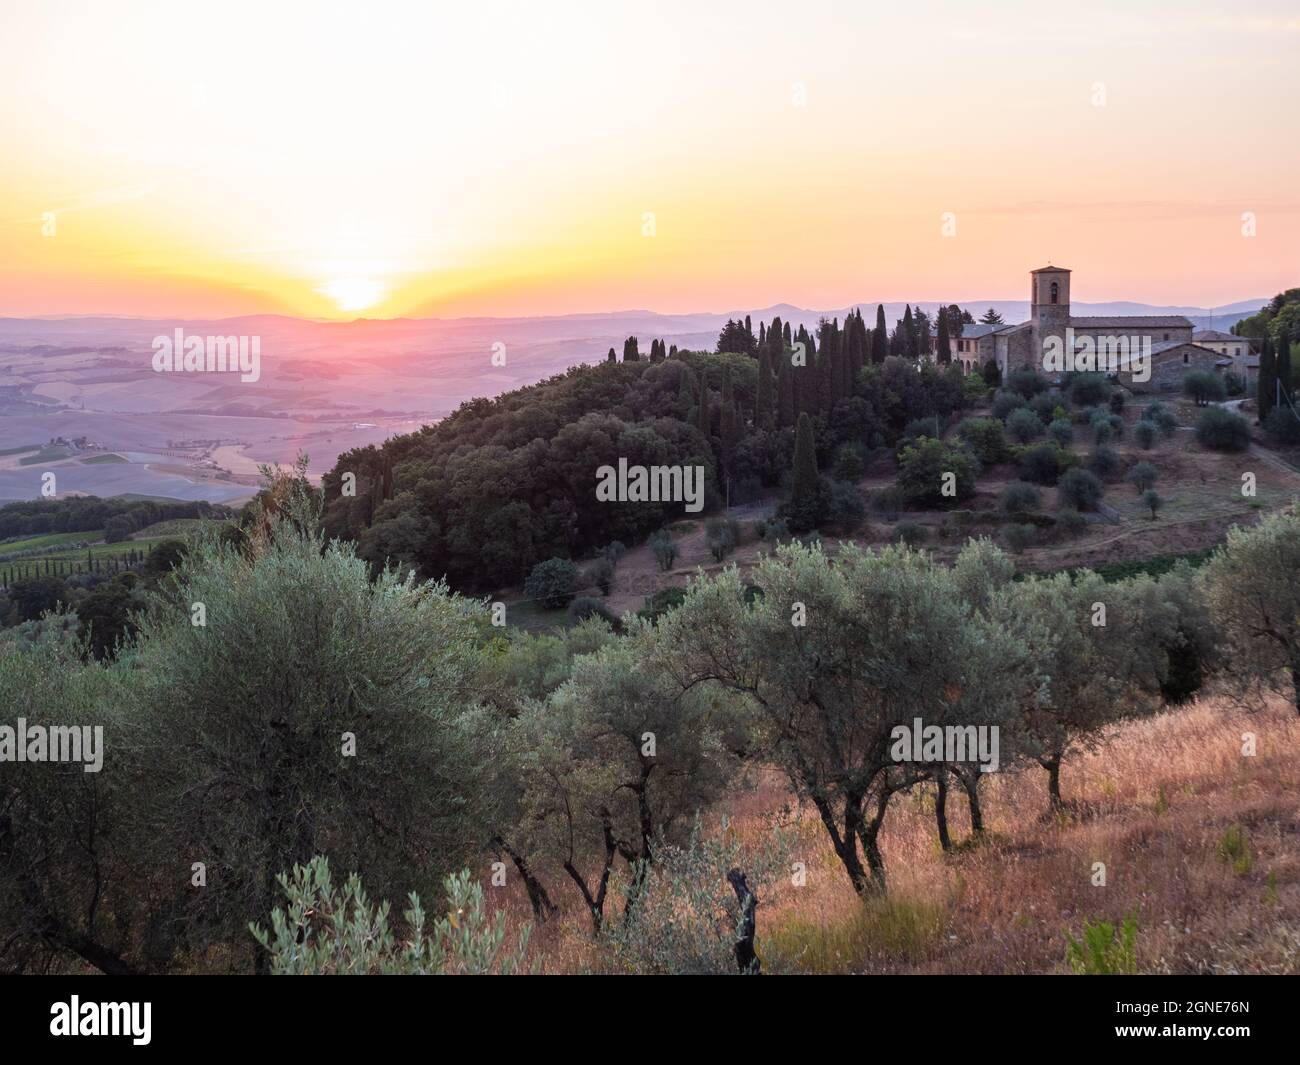 Sunrise Landscape near Montalcino at the Convento dell'Osservanza in Tuscany, Italy with Olive Trees Stock Photo